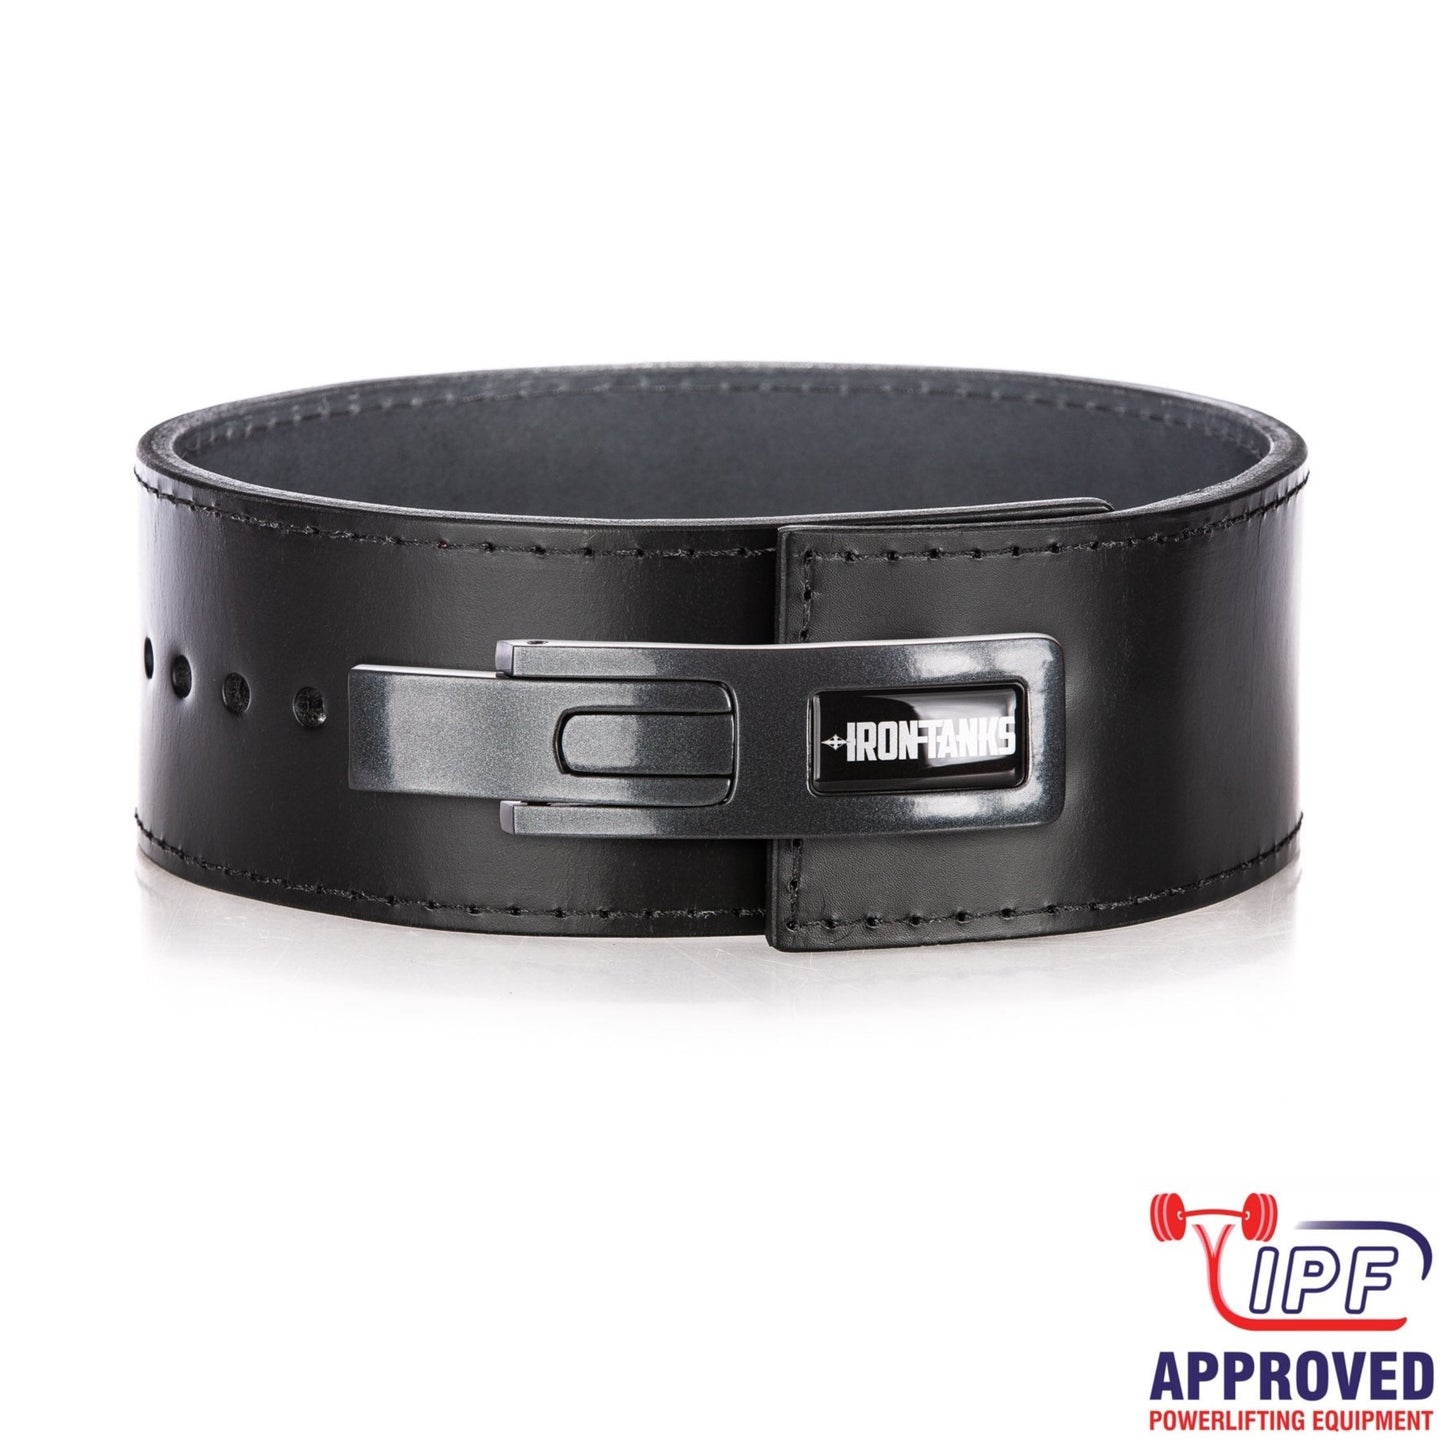 Iron Tanks Hellraiser Powerlifting Lever Belt - 10mm/13mm thick - IPF APPROVED (NO LEVER)